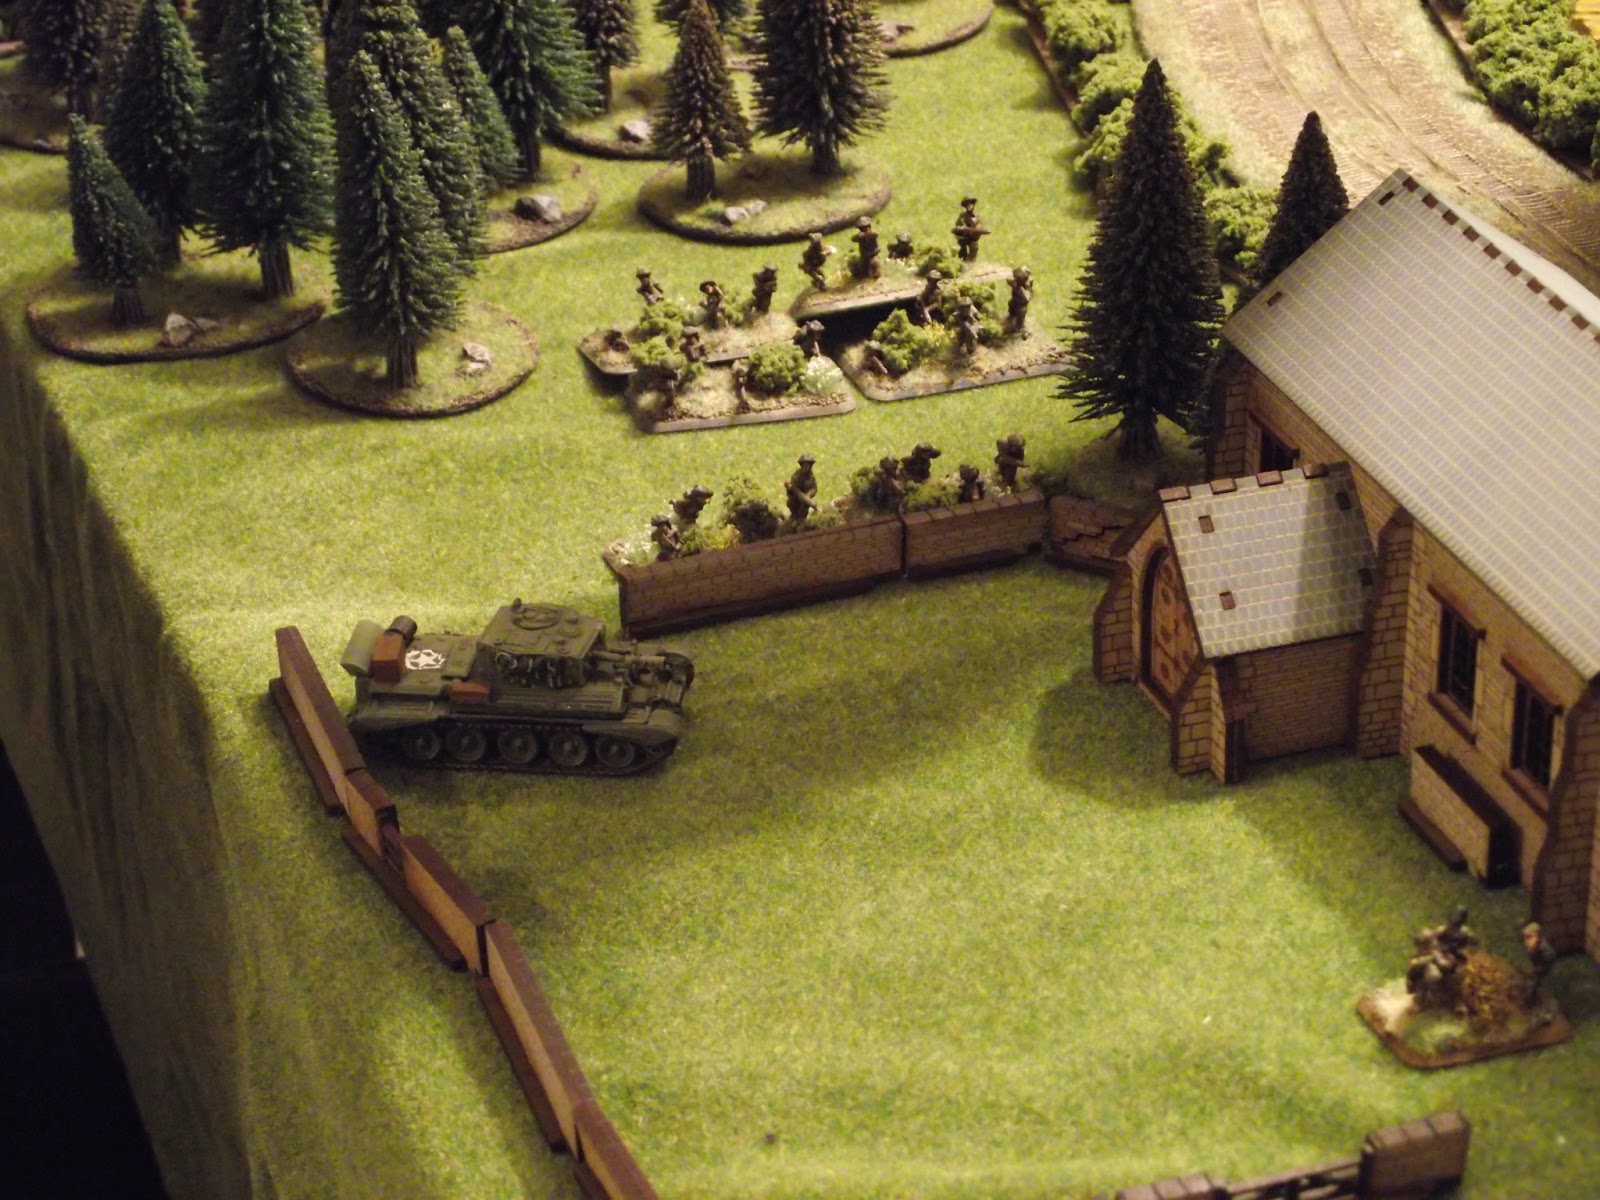  Cromwell breaks down the wall and gets ready to pound the SS infantry who have taken shelter inside. 